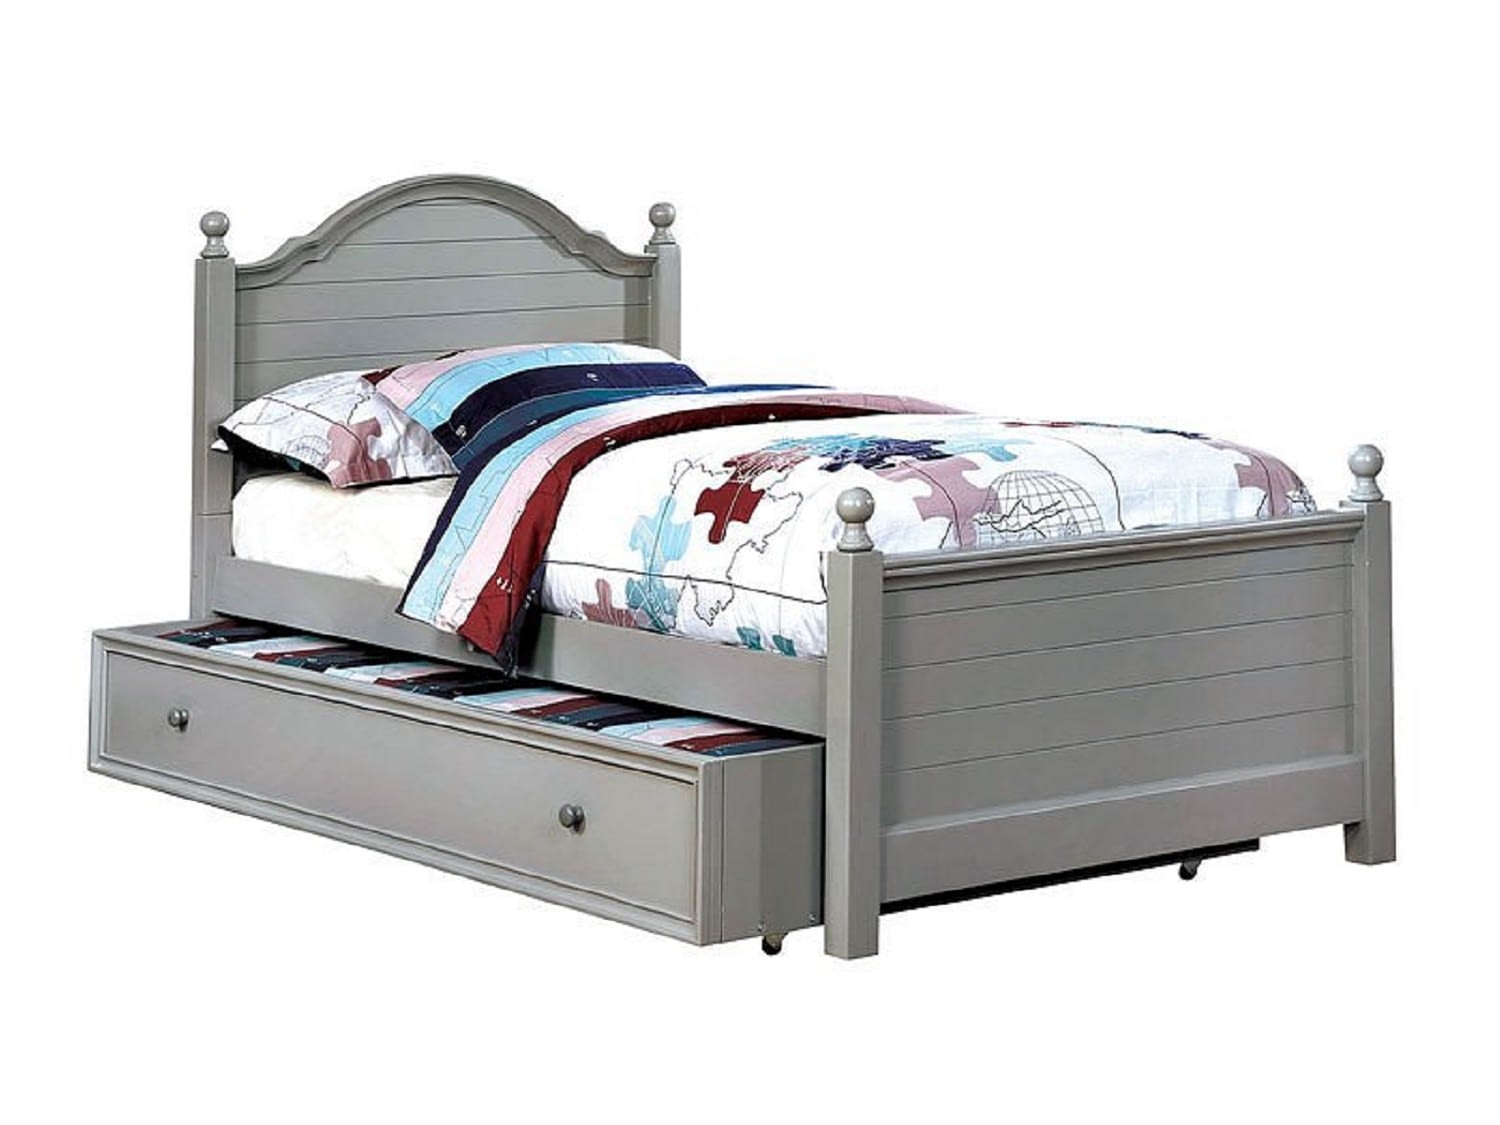 MINOT Twin Bed with Trundle